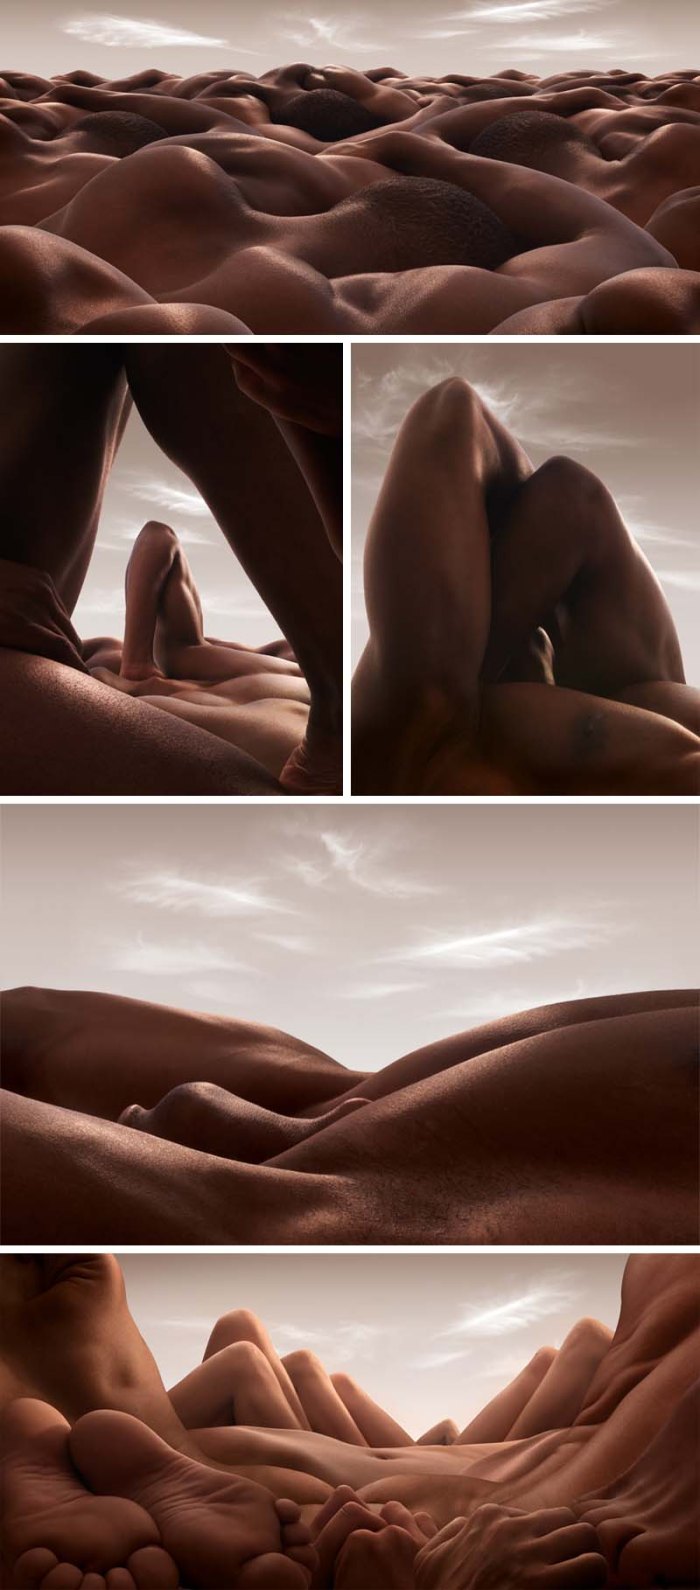 Bodyscapes, photos of landscapes made with bodies, by Carl Warner, contemporary photography